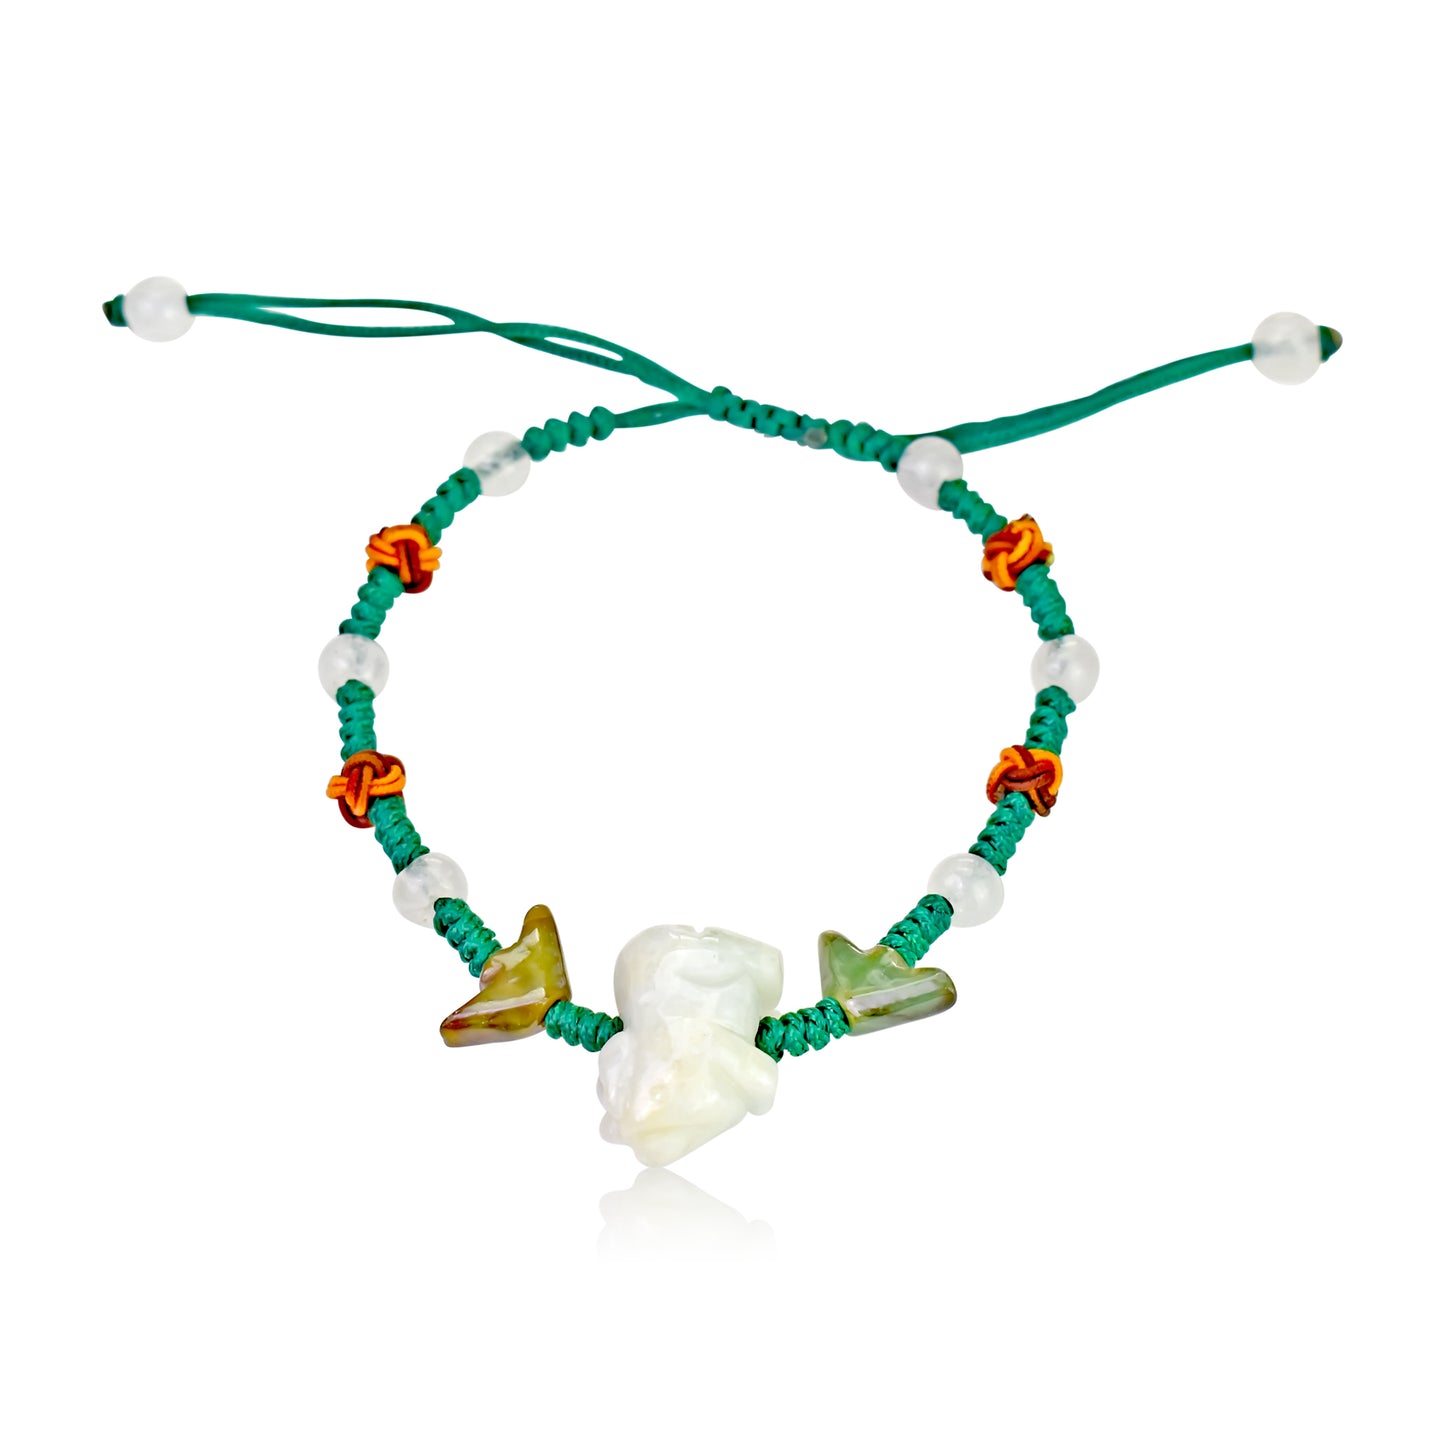 A Unique Gift: Boar Chinese Zodiac Handmade Jade Bracelet made with Light Green Cord